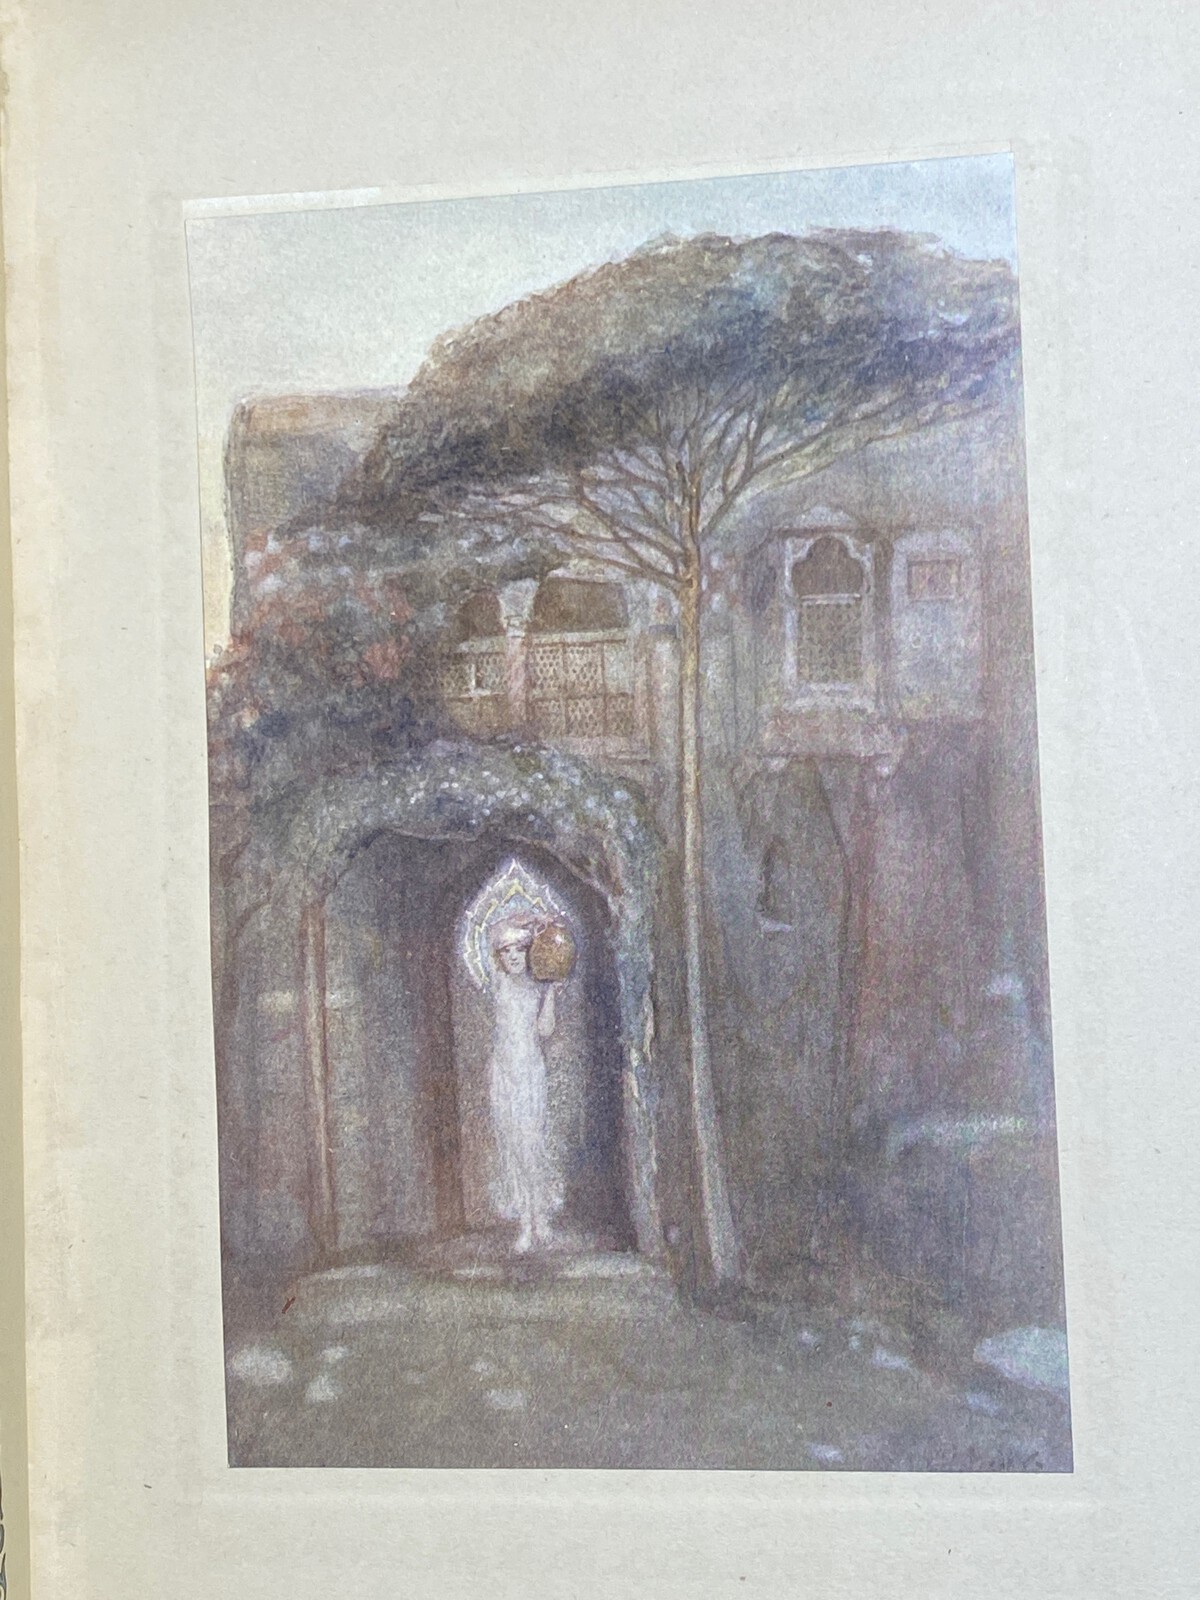 Person, carrying jug, walking through arch beside tree